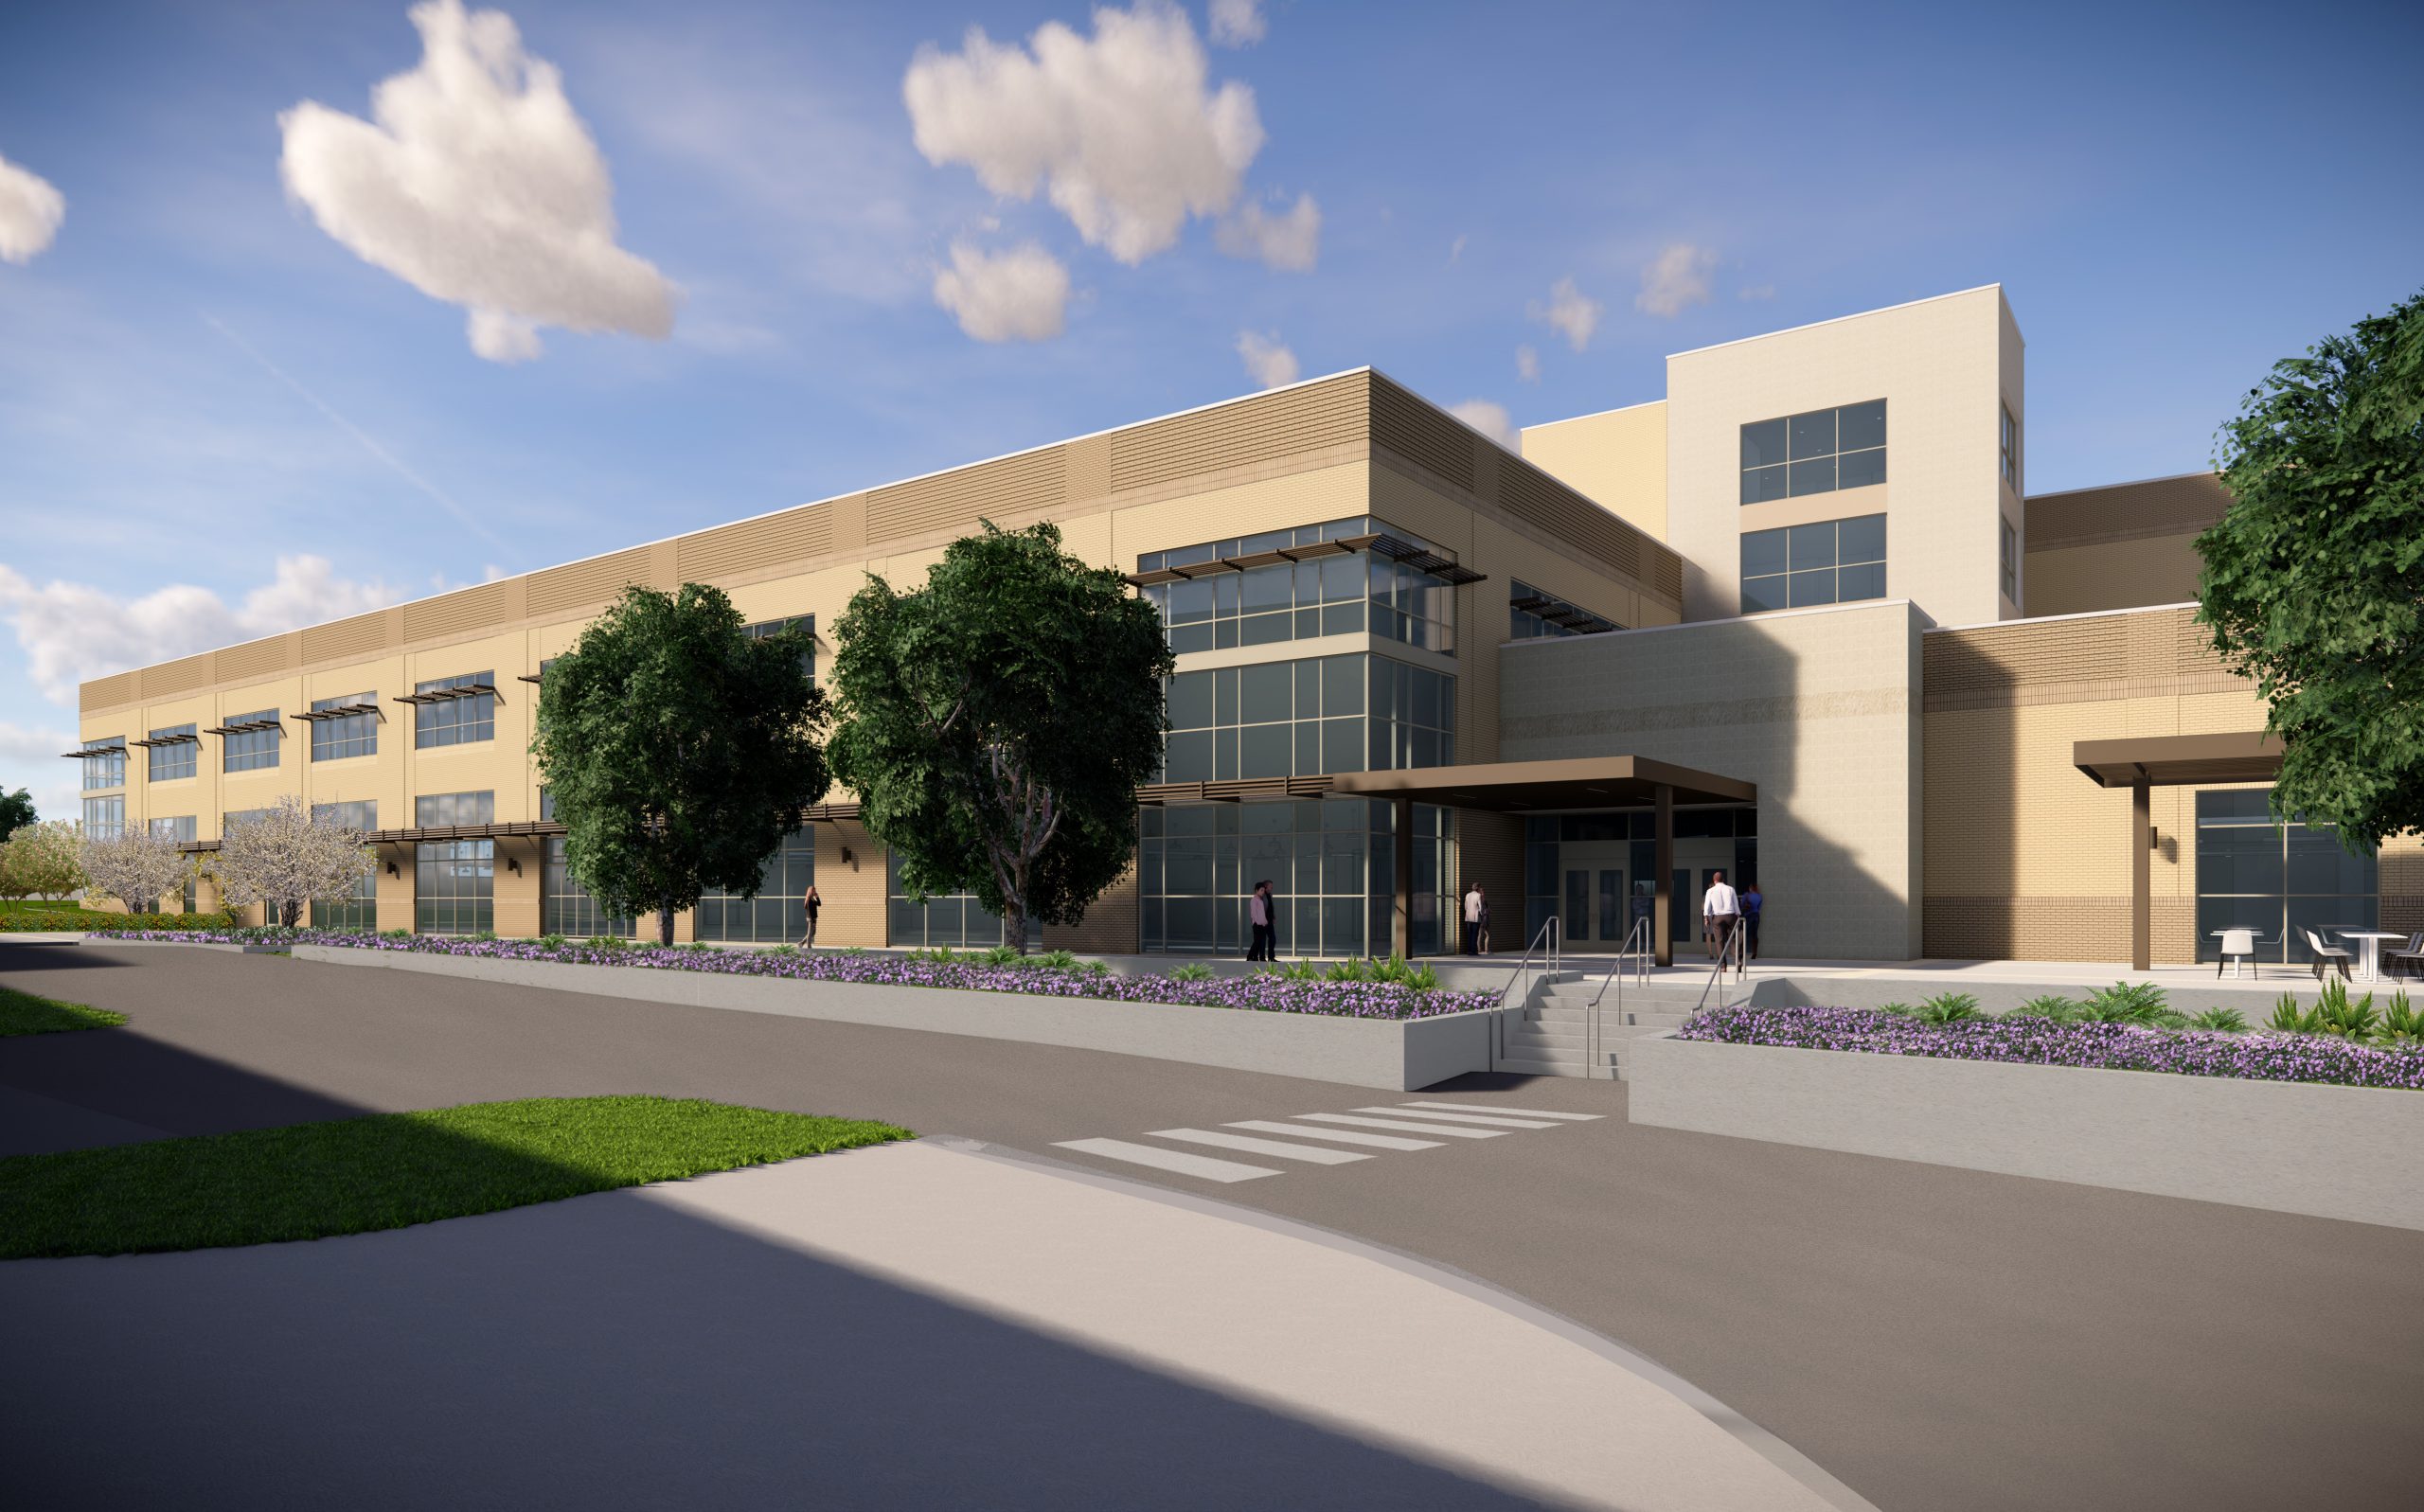 Rendering of the Polo Road Rec Center